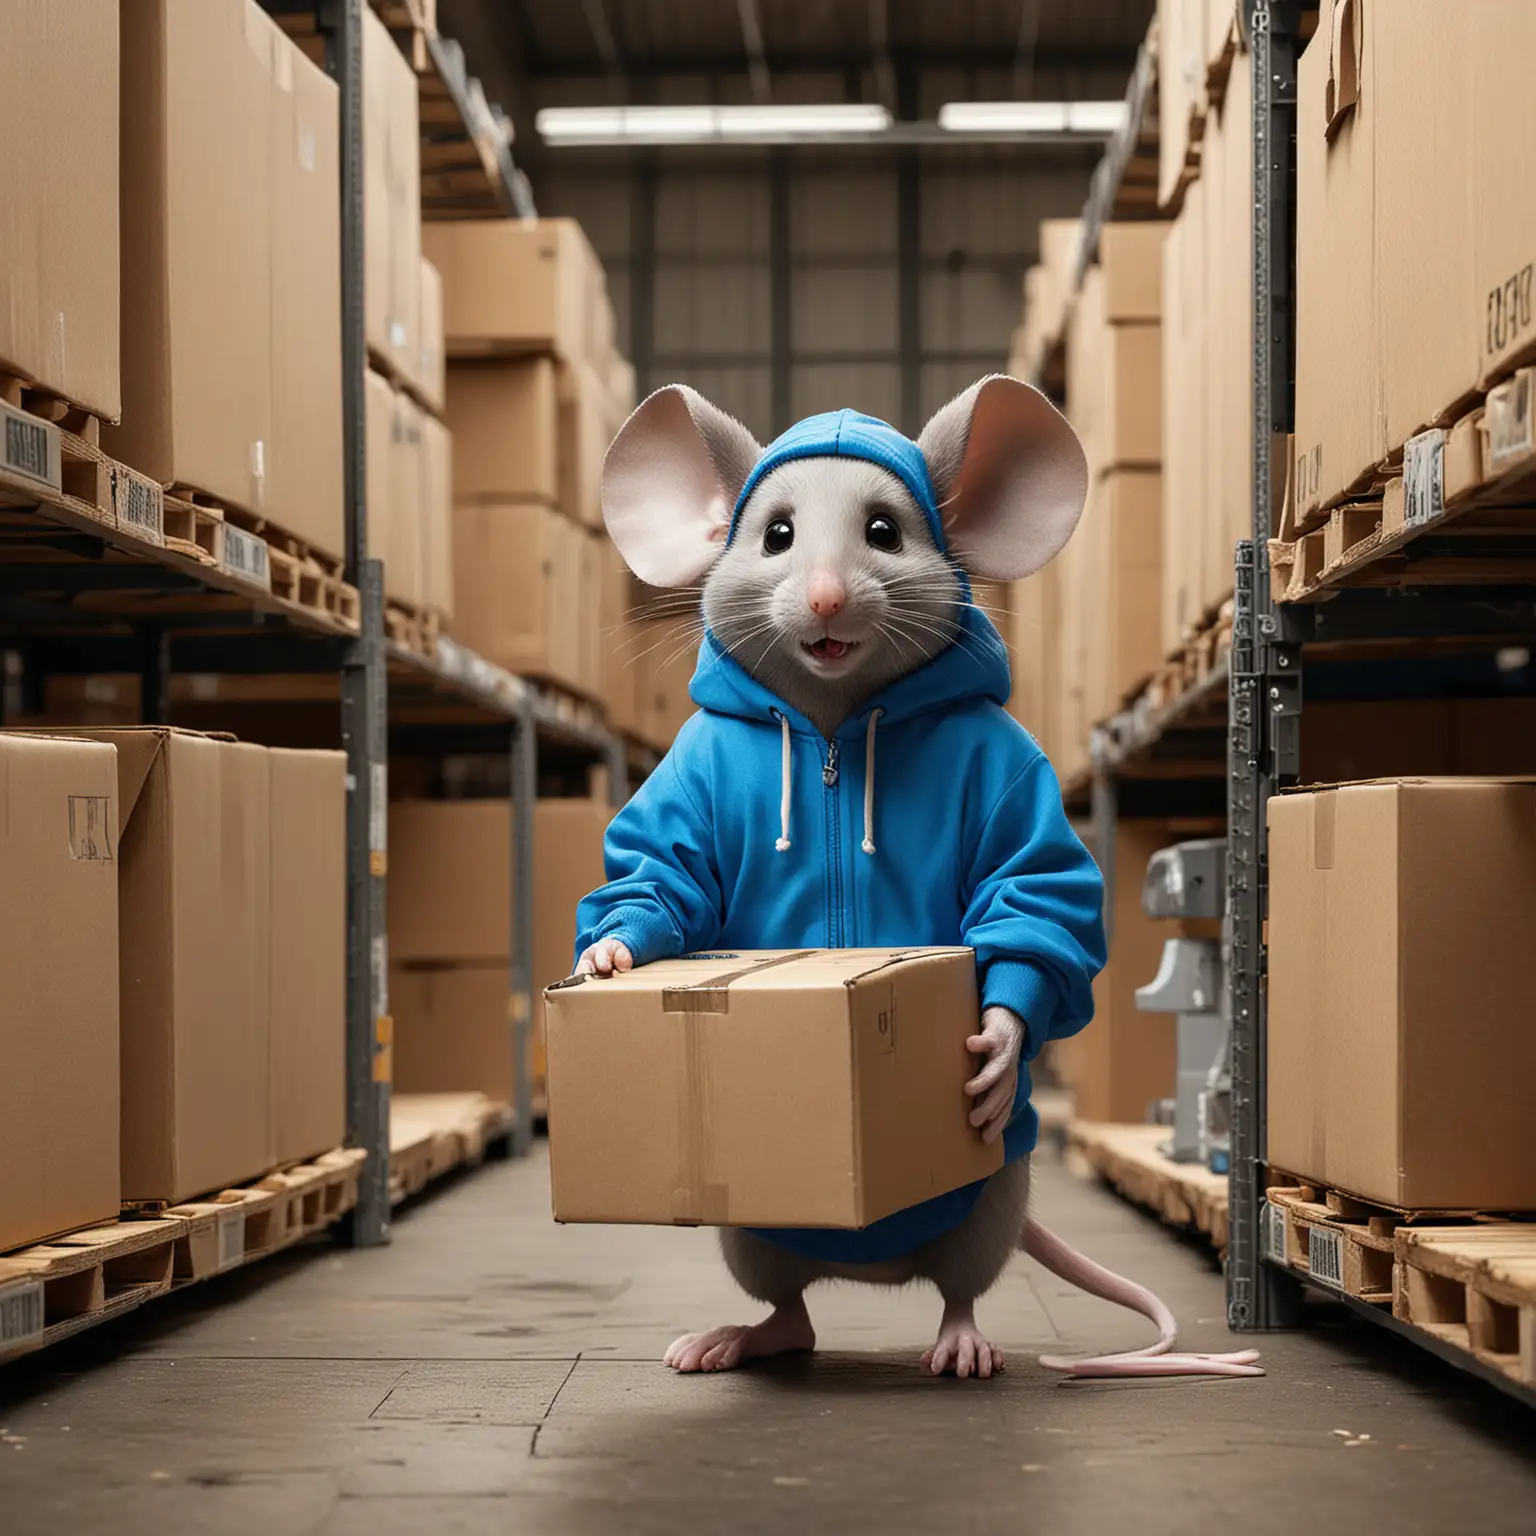 A big mouse wearing a blue hoody loading boxes on a warehouse shelf